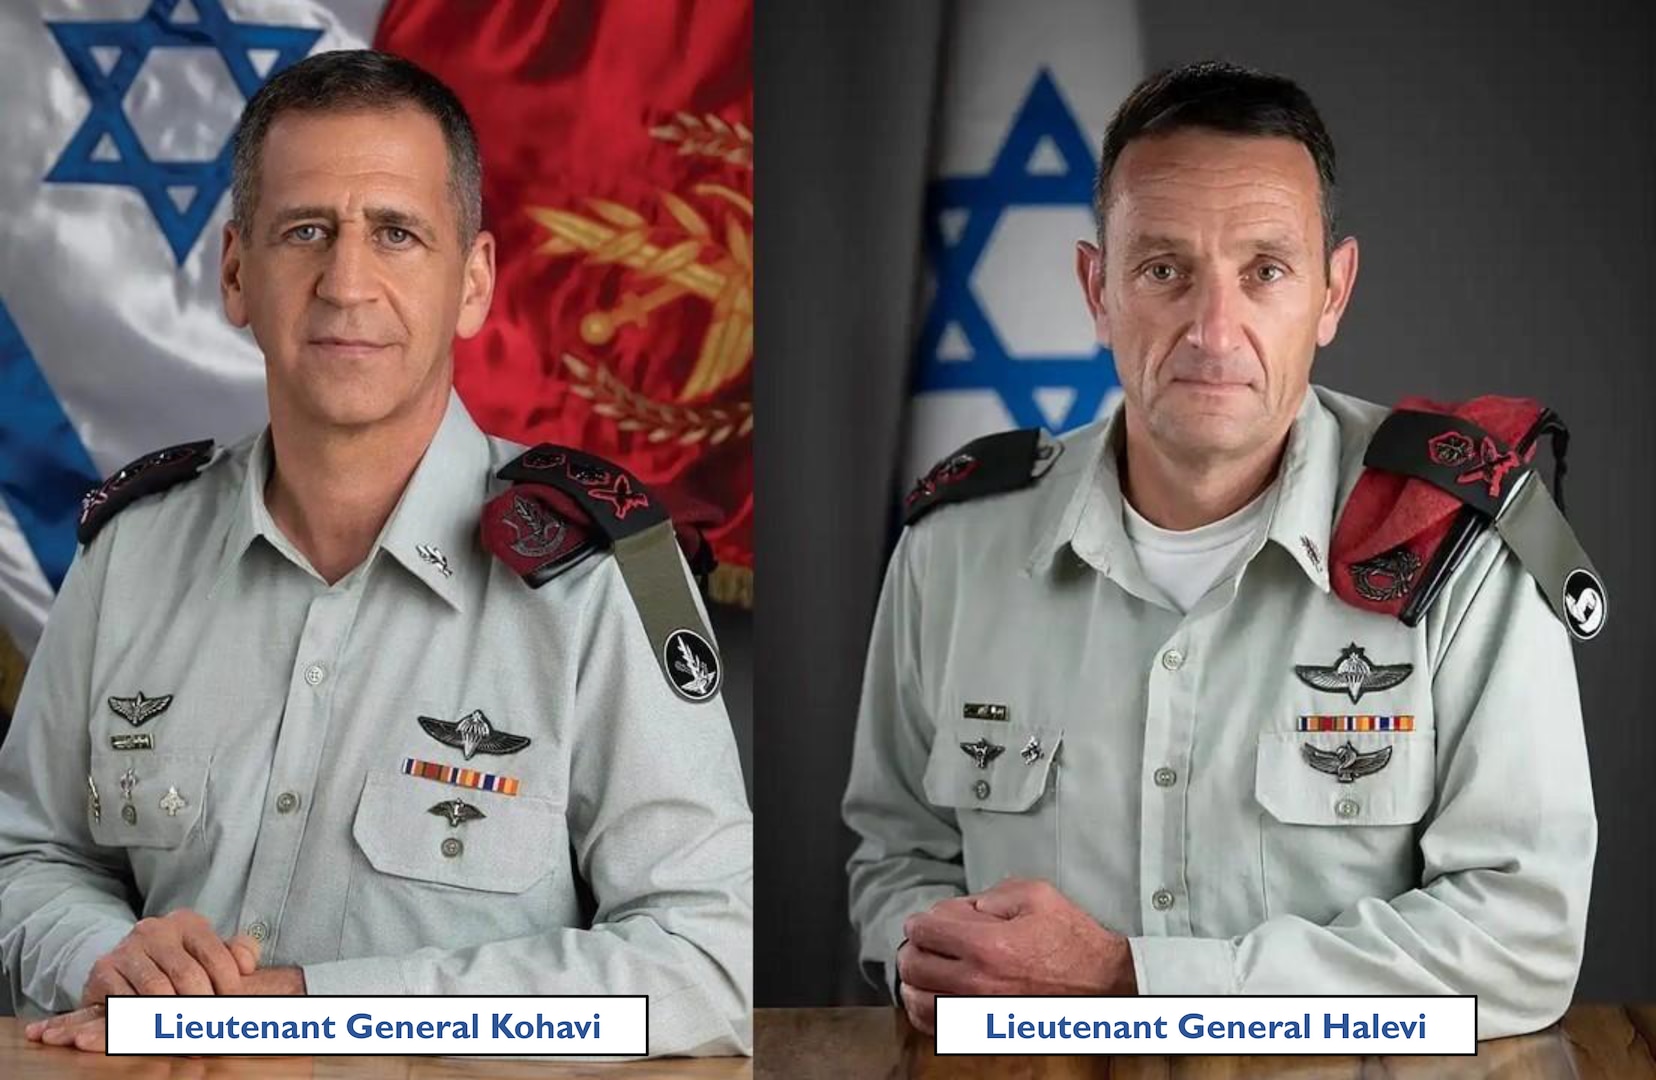 Tampa, Fla. - Today General Michael “Erik” Kurilla, CENTCOM commander, congratulated Lieutenant General Aviv Kohavi, as he relinquished his position as 22nd Chief of General Staff of the Israeli Defense Force (IDF). Kurilla lauded Kohavi on an incredibly successful four-year command and a remarkable 40-year career of service to the IDF. “General Kohavi expanded, deepened, and advanced the relations between our militaries and fostered new partnerships in the region,” Kurilla said. “In these efforts Aviv bolstered security and stability across the region.”

Under General Kohavi’s leadership, Israel realigned from U.S. European Command to U.S. Central Command in 2021. 

General Kurilla also welcomed Lieutenant General Herzi Halevi, the new IDF Chief of General Staff, on his appointment. “I look forward to continuing to strengthen the partnership between our militaries and with forces throughout the region alongside General Halevi. He has a long and distinguished career as a warfighter leading the IDF’s most elite units. I am confident he will strengthen the relationship between our militaries and continue efforts on behalf of the region.”